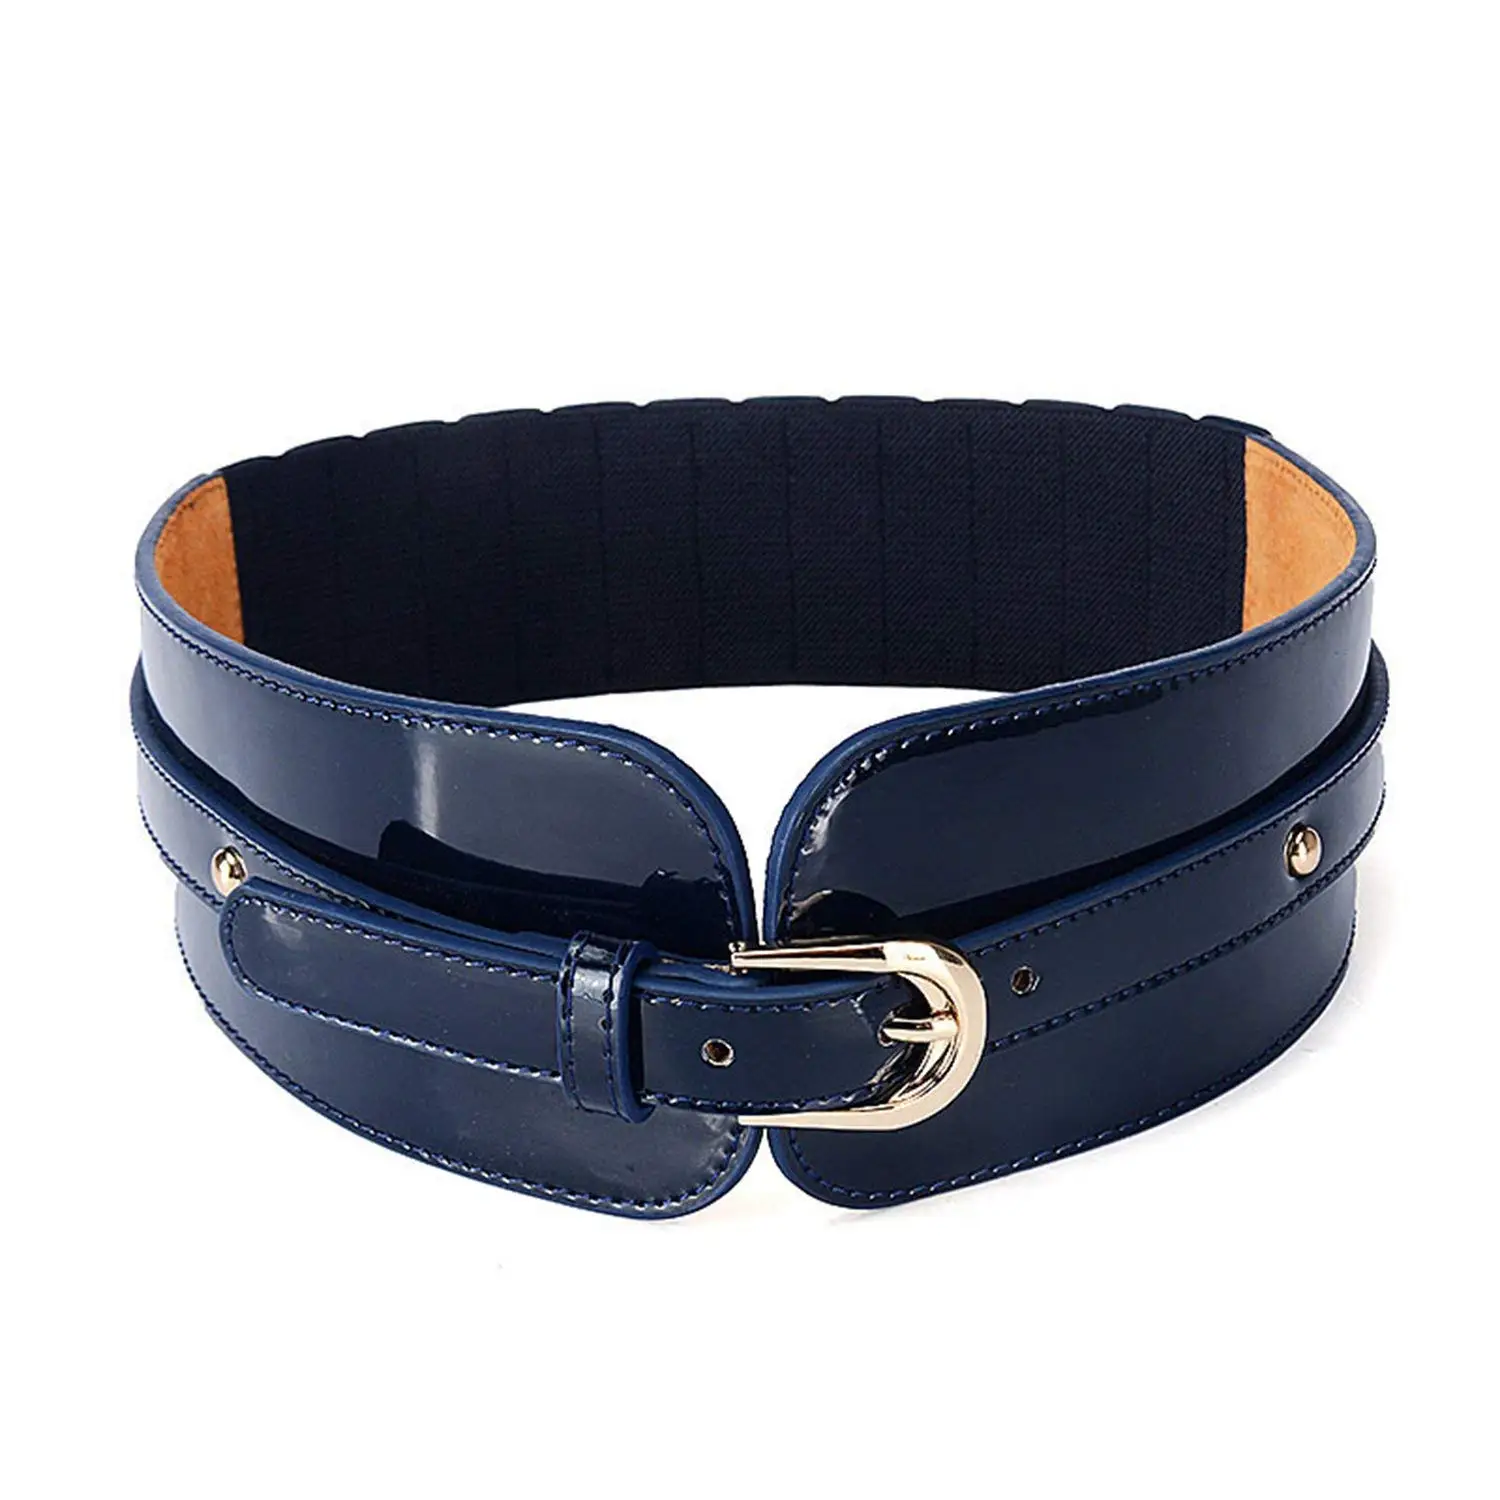 Cheap 3 Inch Wide Leather Belt, find 3 Inch Wide Leather Belt deals on ...